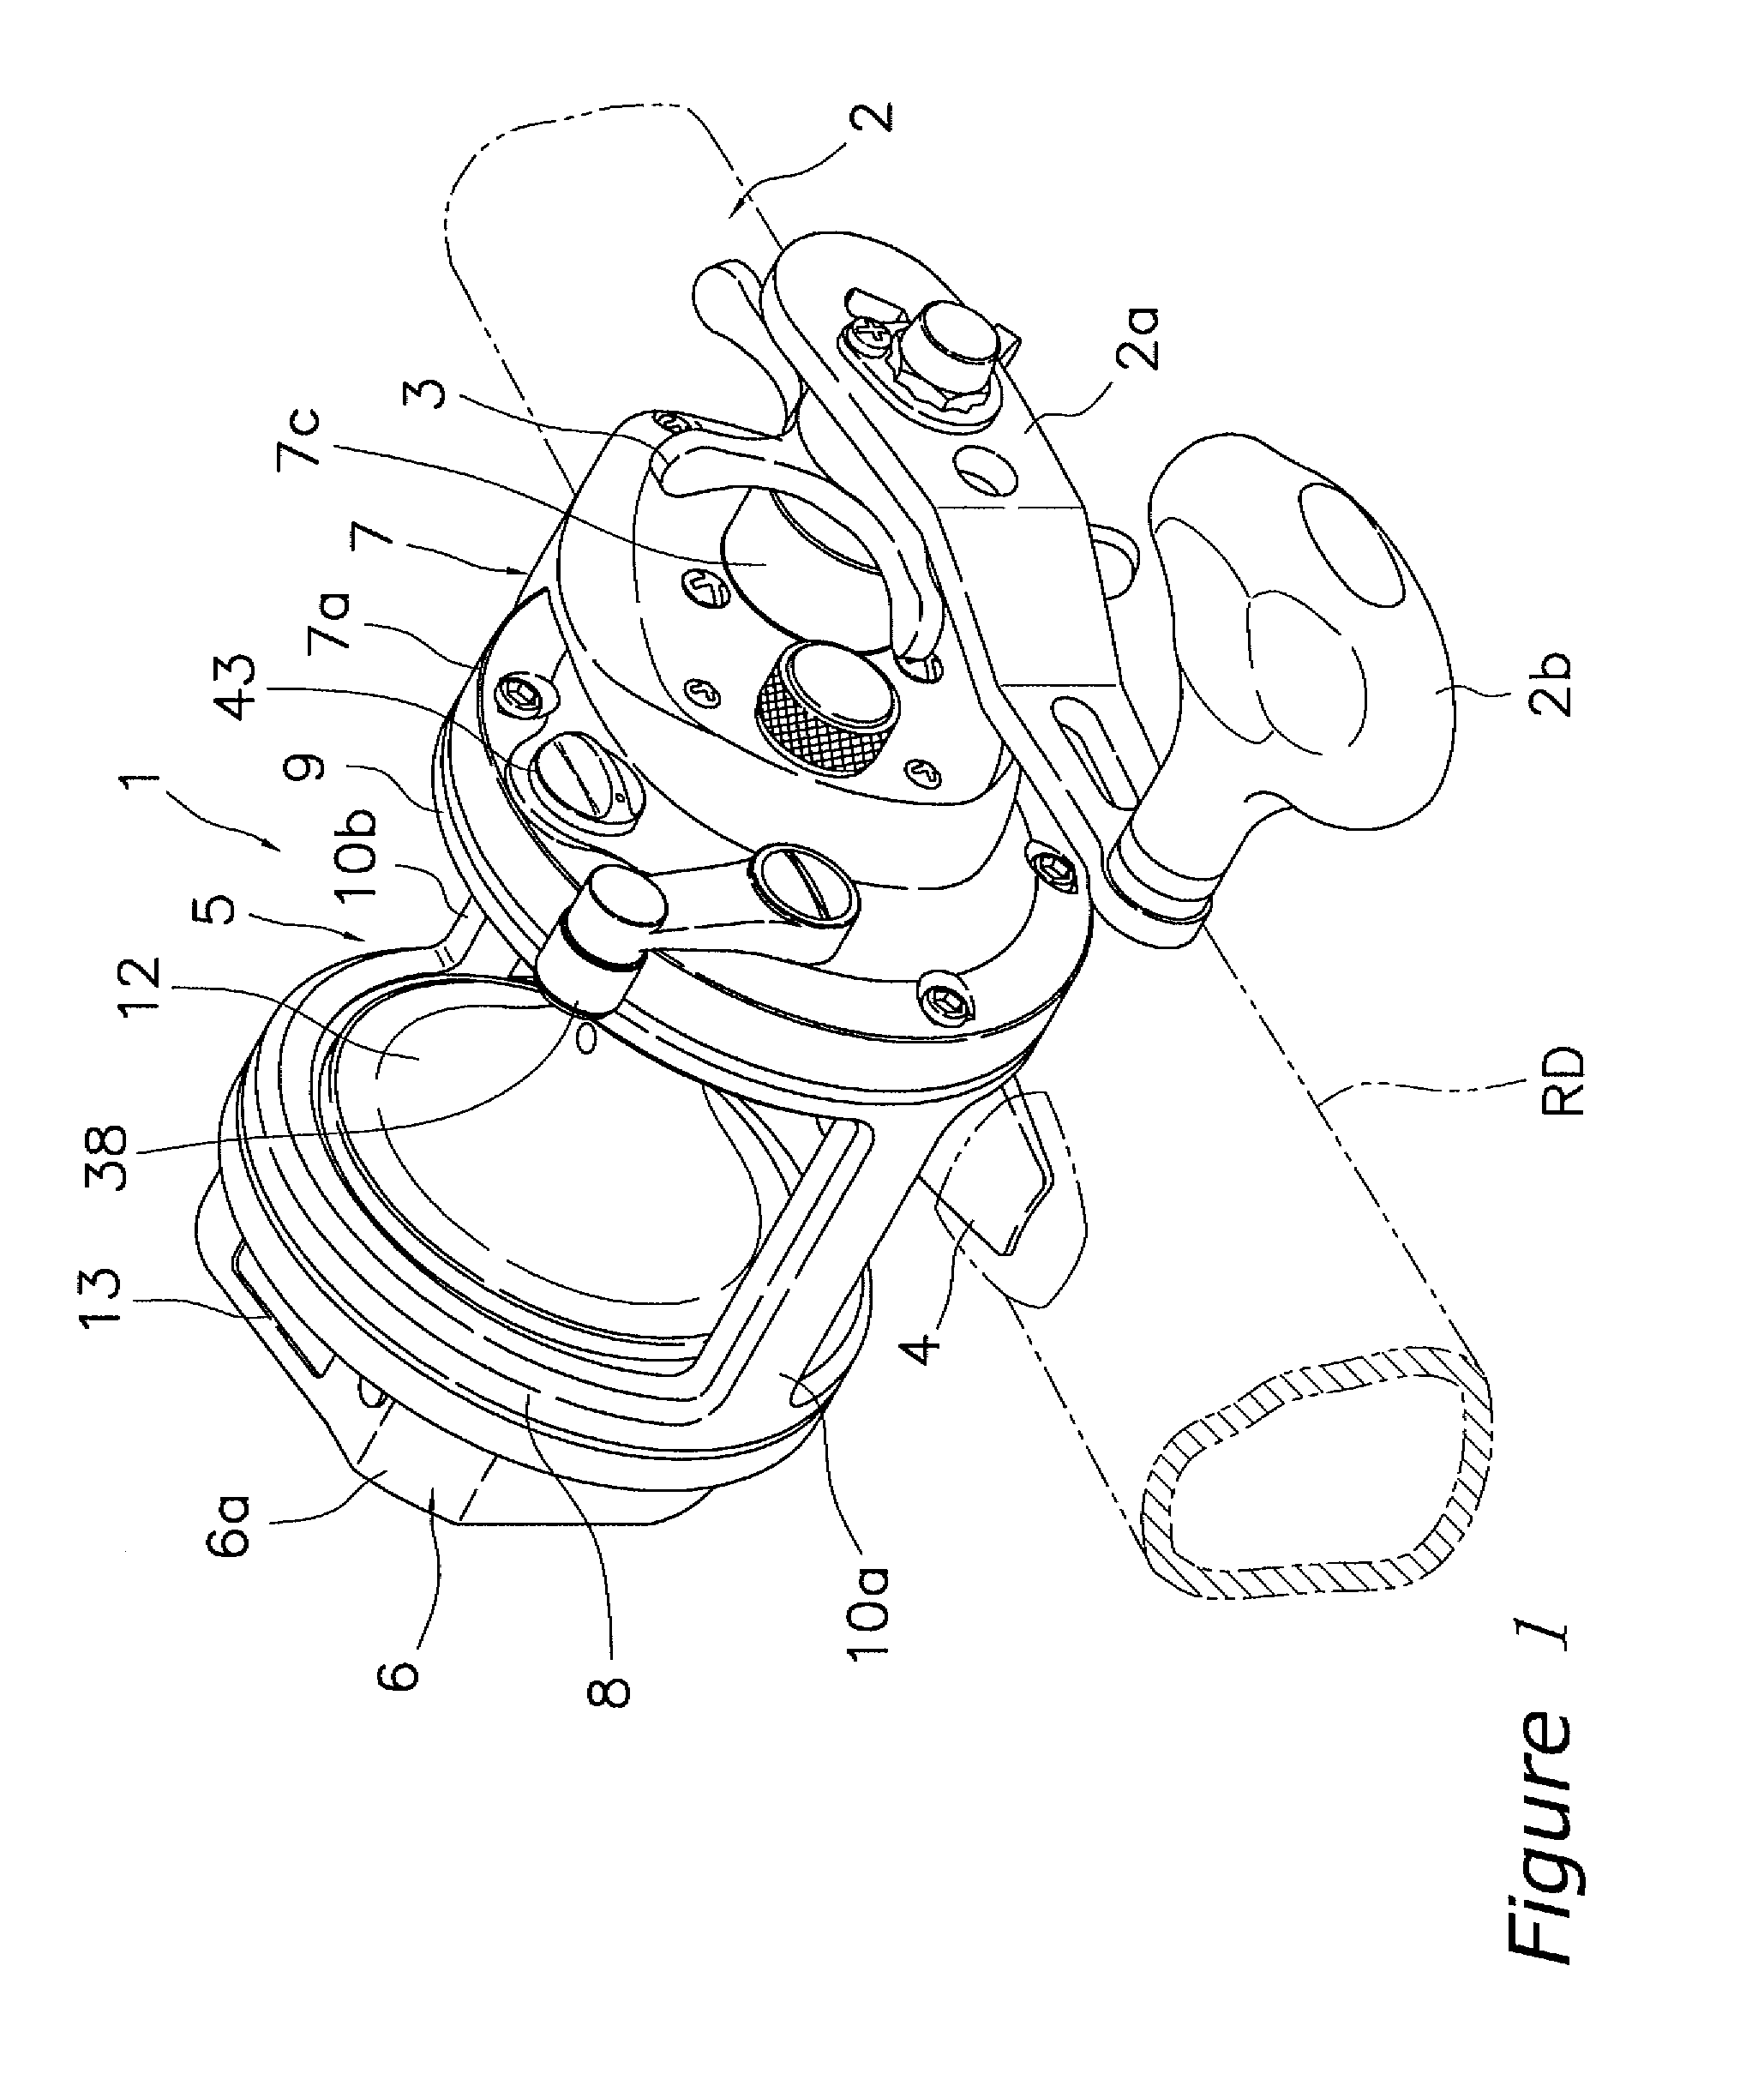 Dual bearing reel handle shaft structure